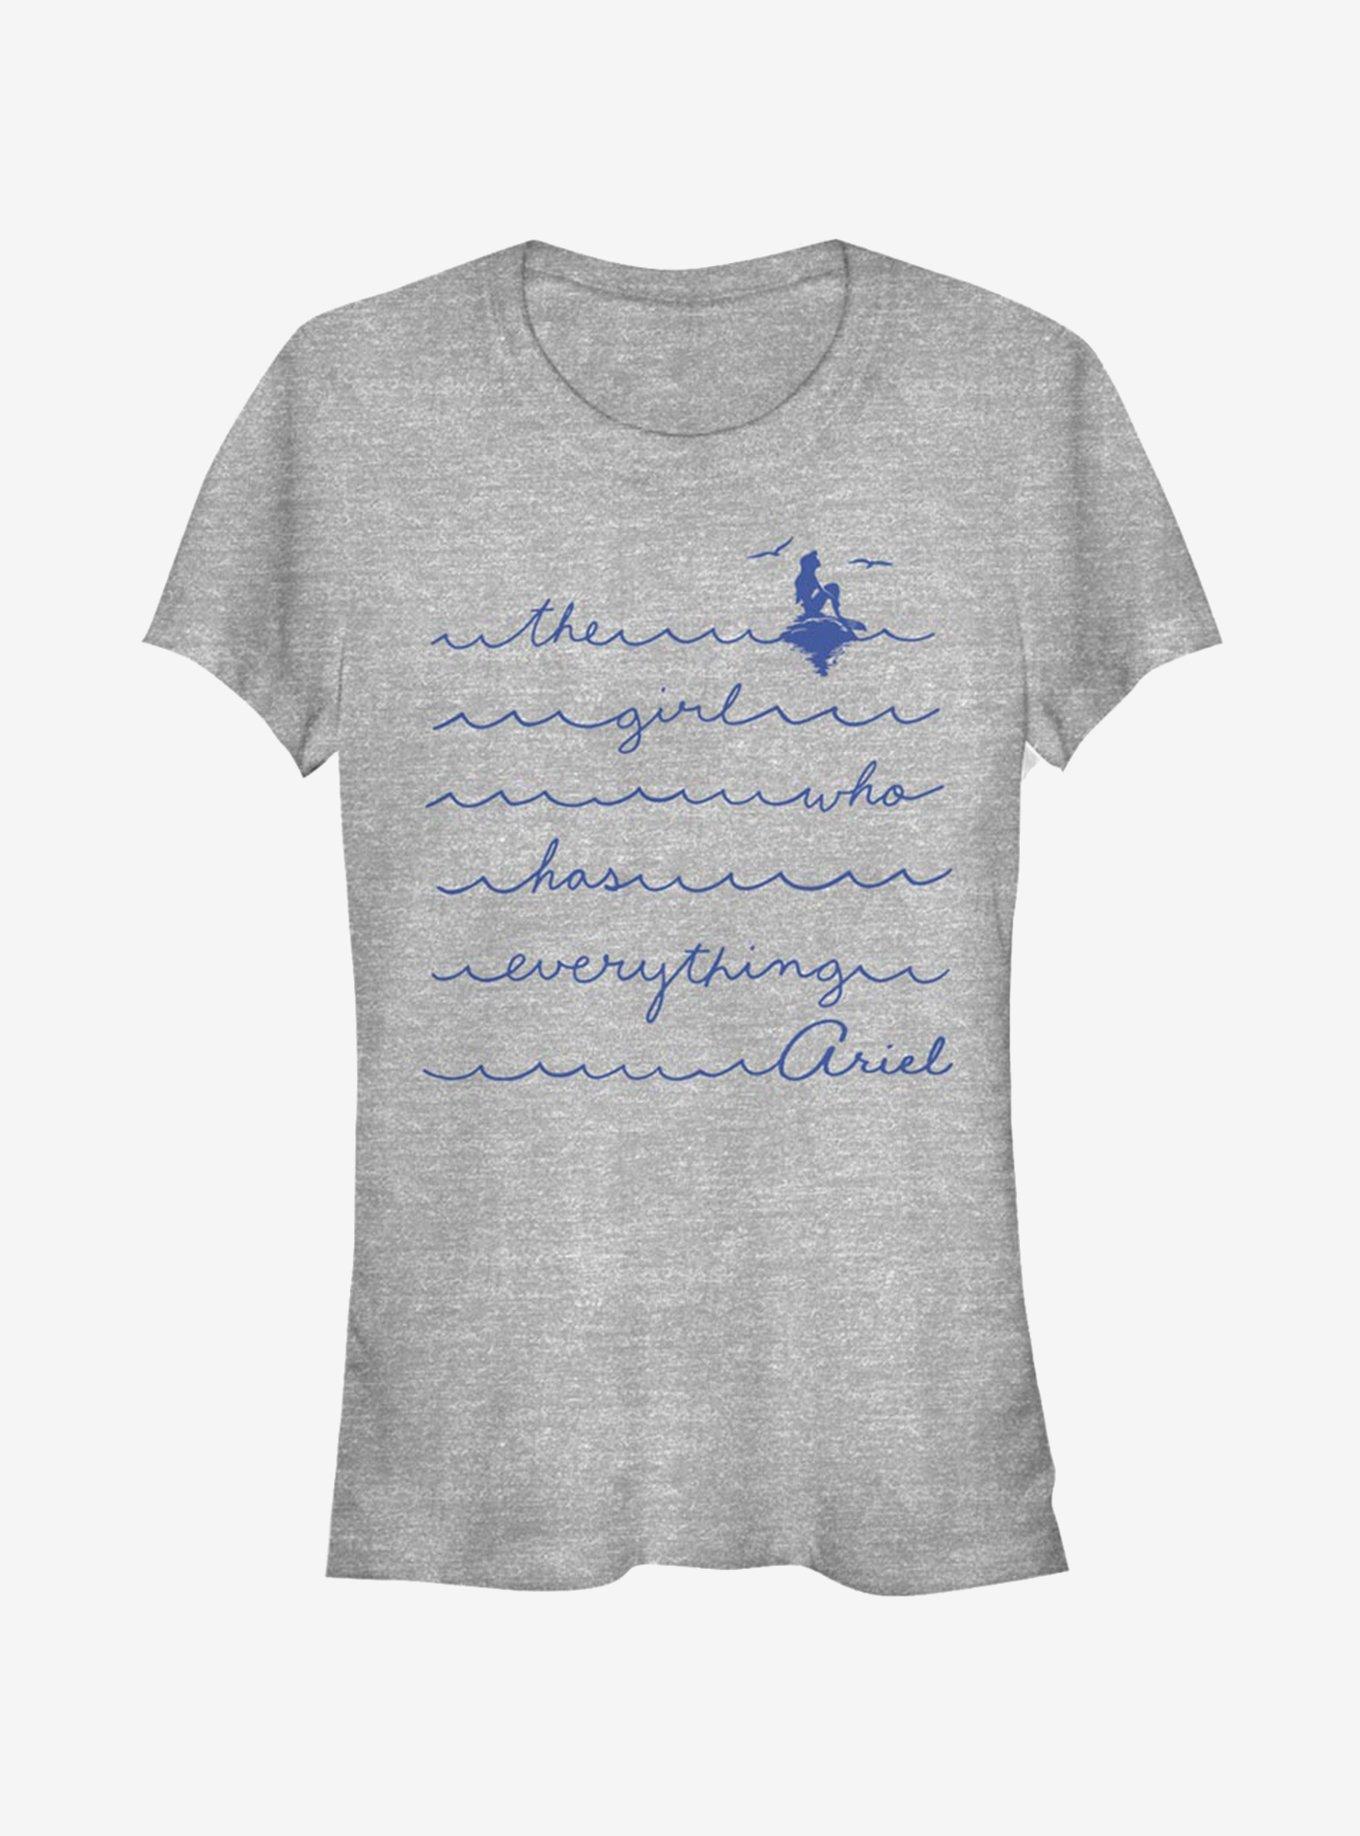 Disney The Little Mermaid The Girl Who Girls T-Shirt, ATH HTR, hi-res